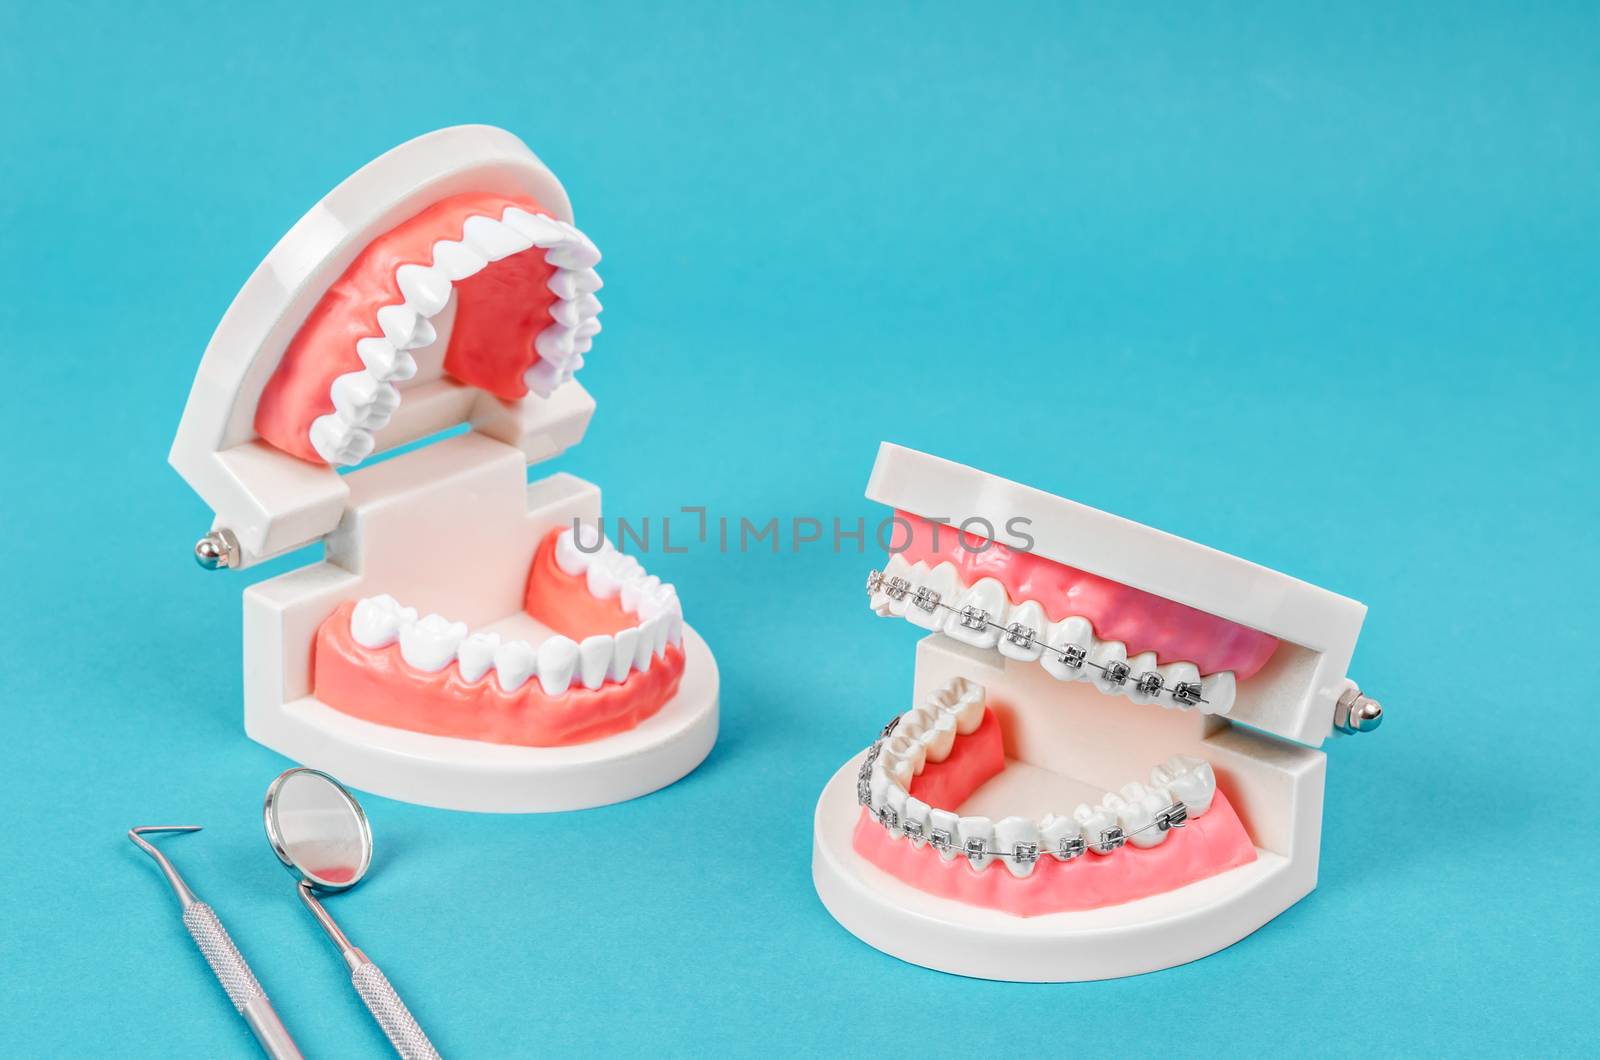 Compare tooth model and tooth model with metal wire dental brace by Gamjai